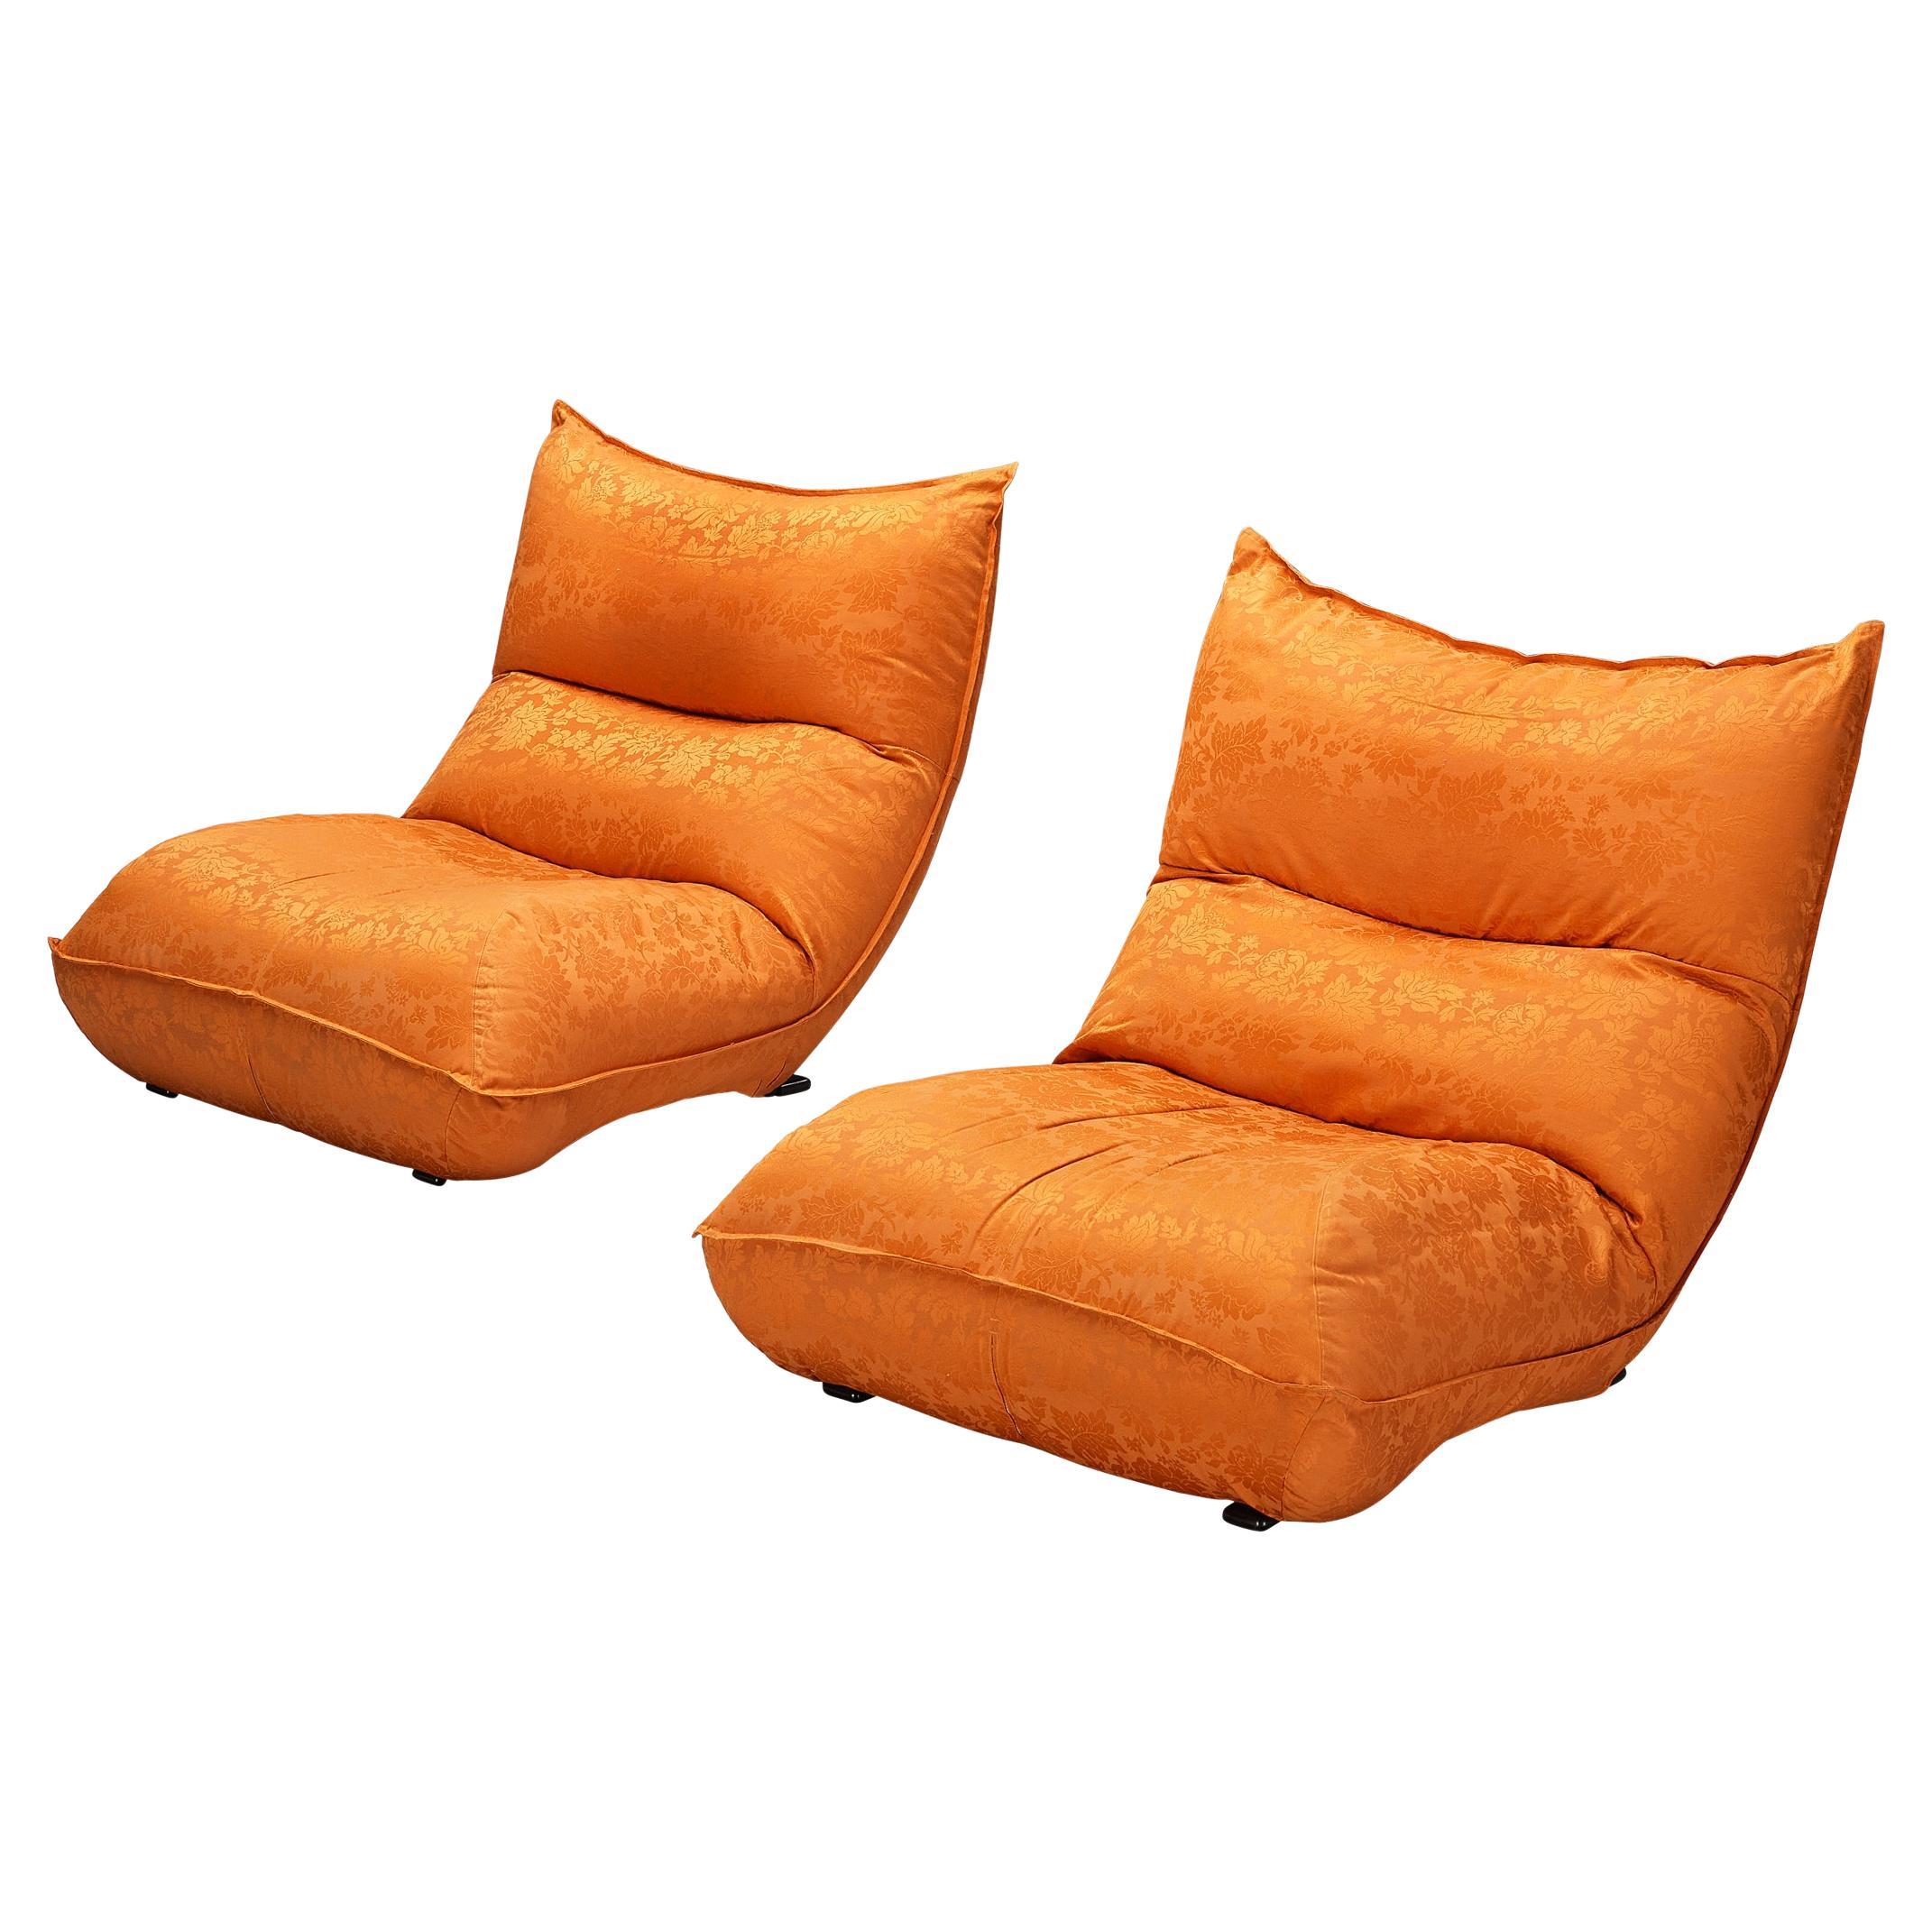 Vittorio Varo for Plan 'Zinzolo' Lounge Chairs in Orange Upholstery For Sale